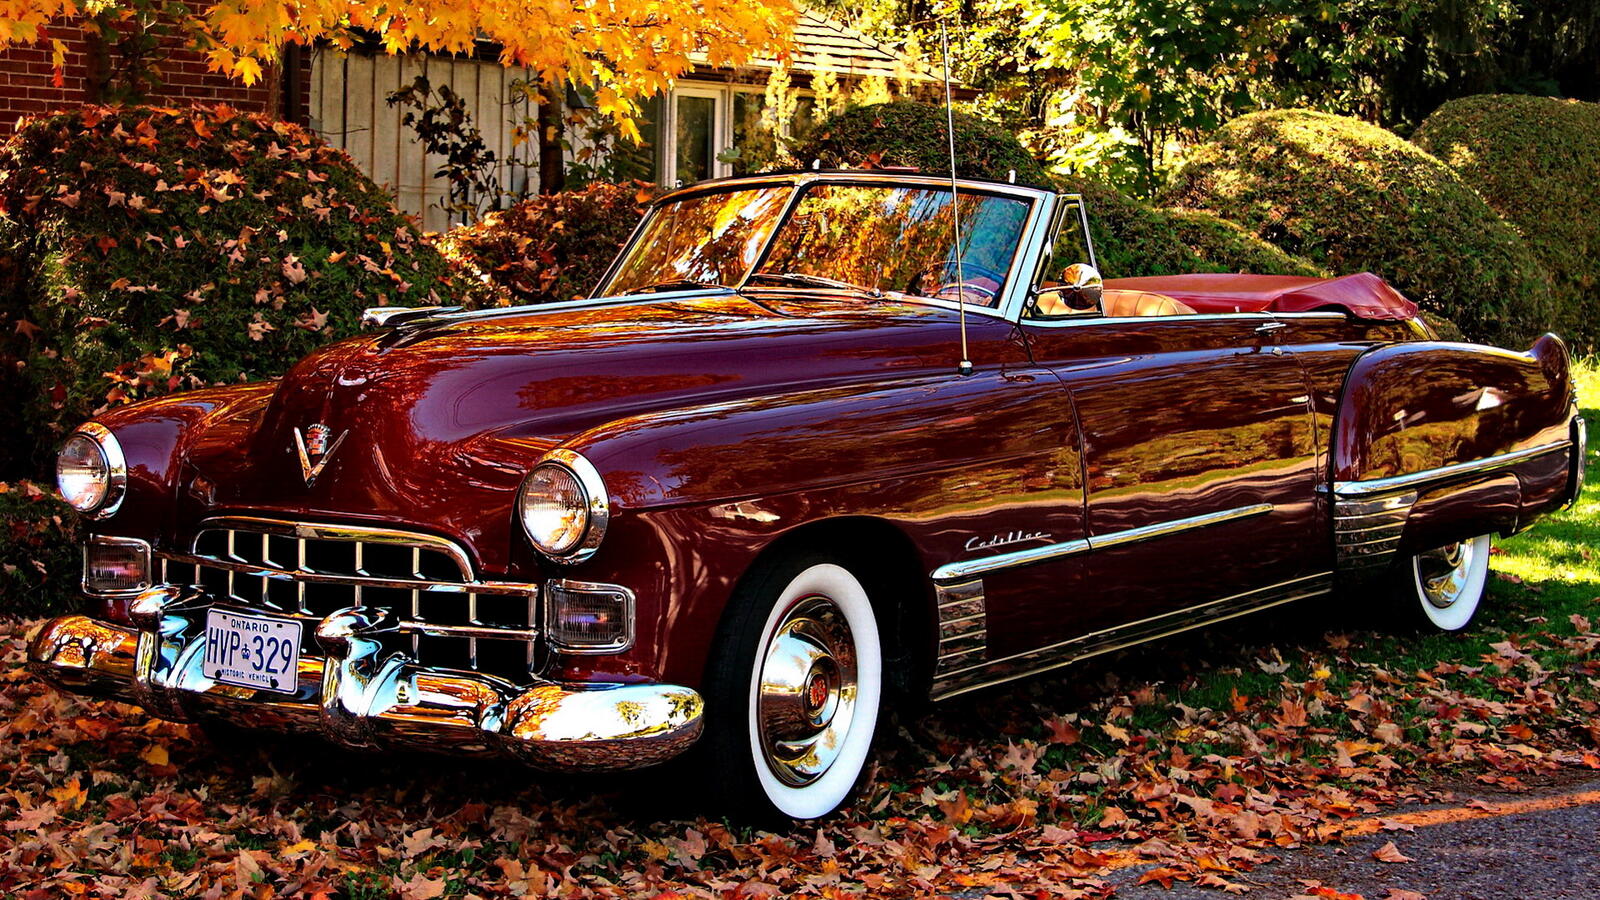 Free photo A vintage Cadillac convertible in red